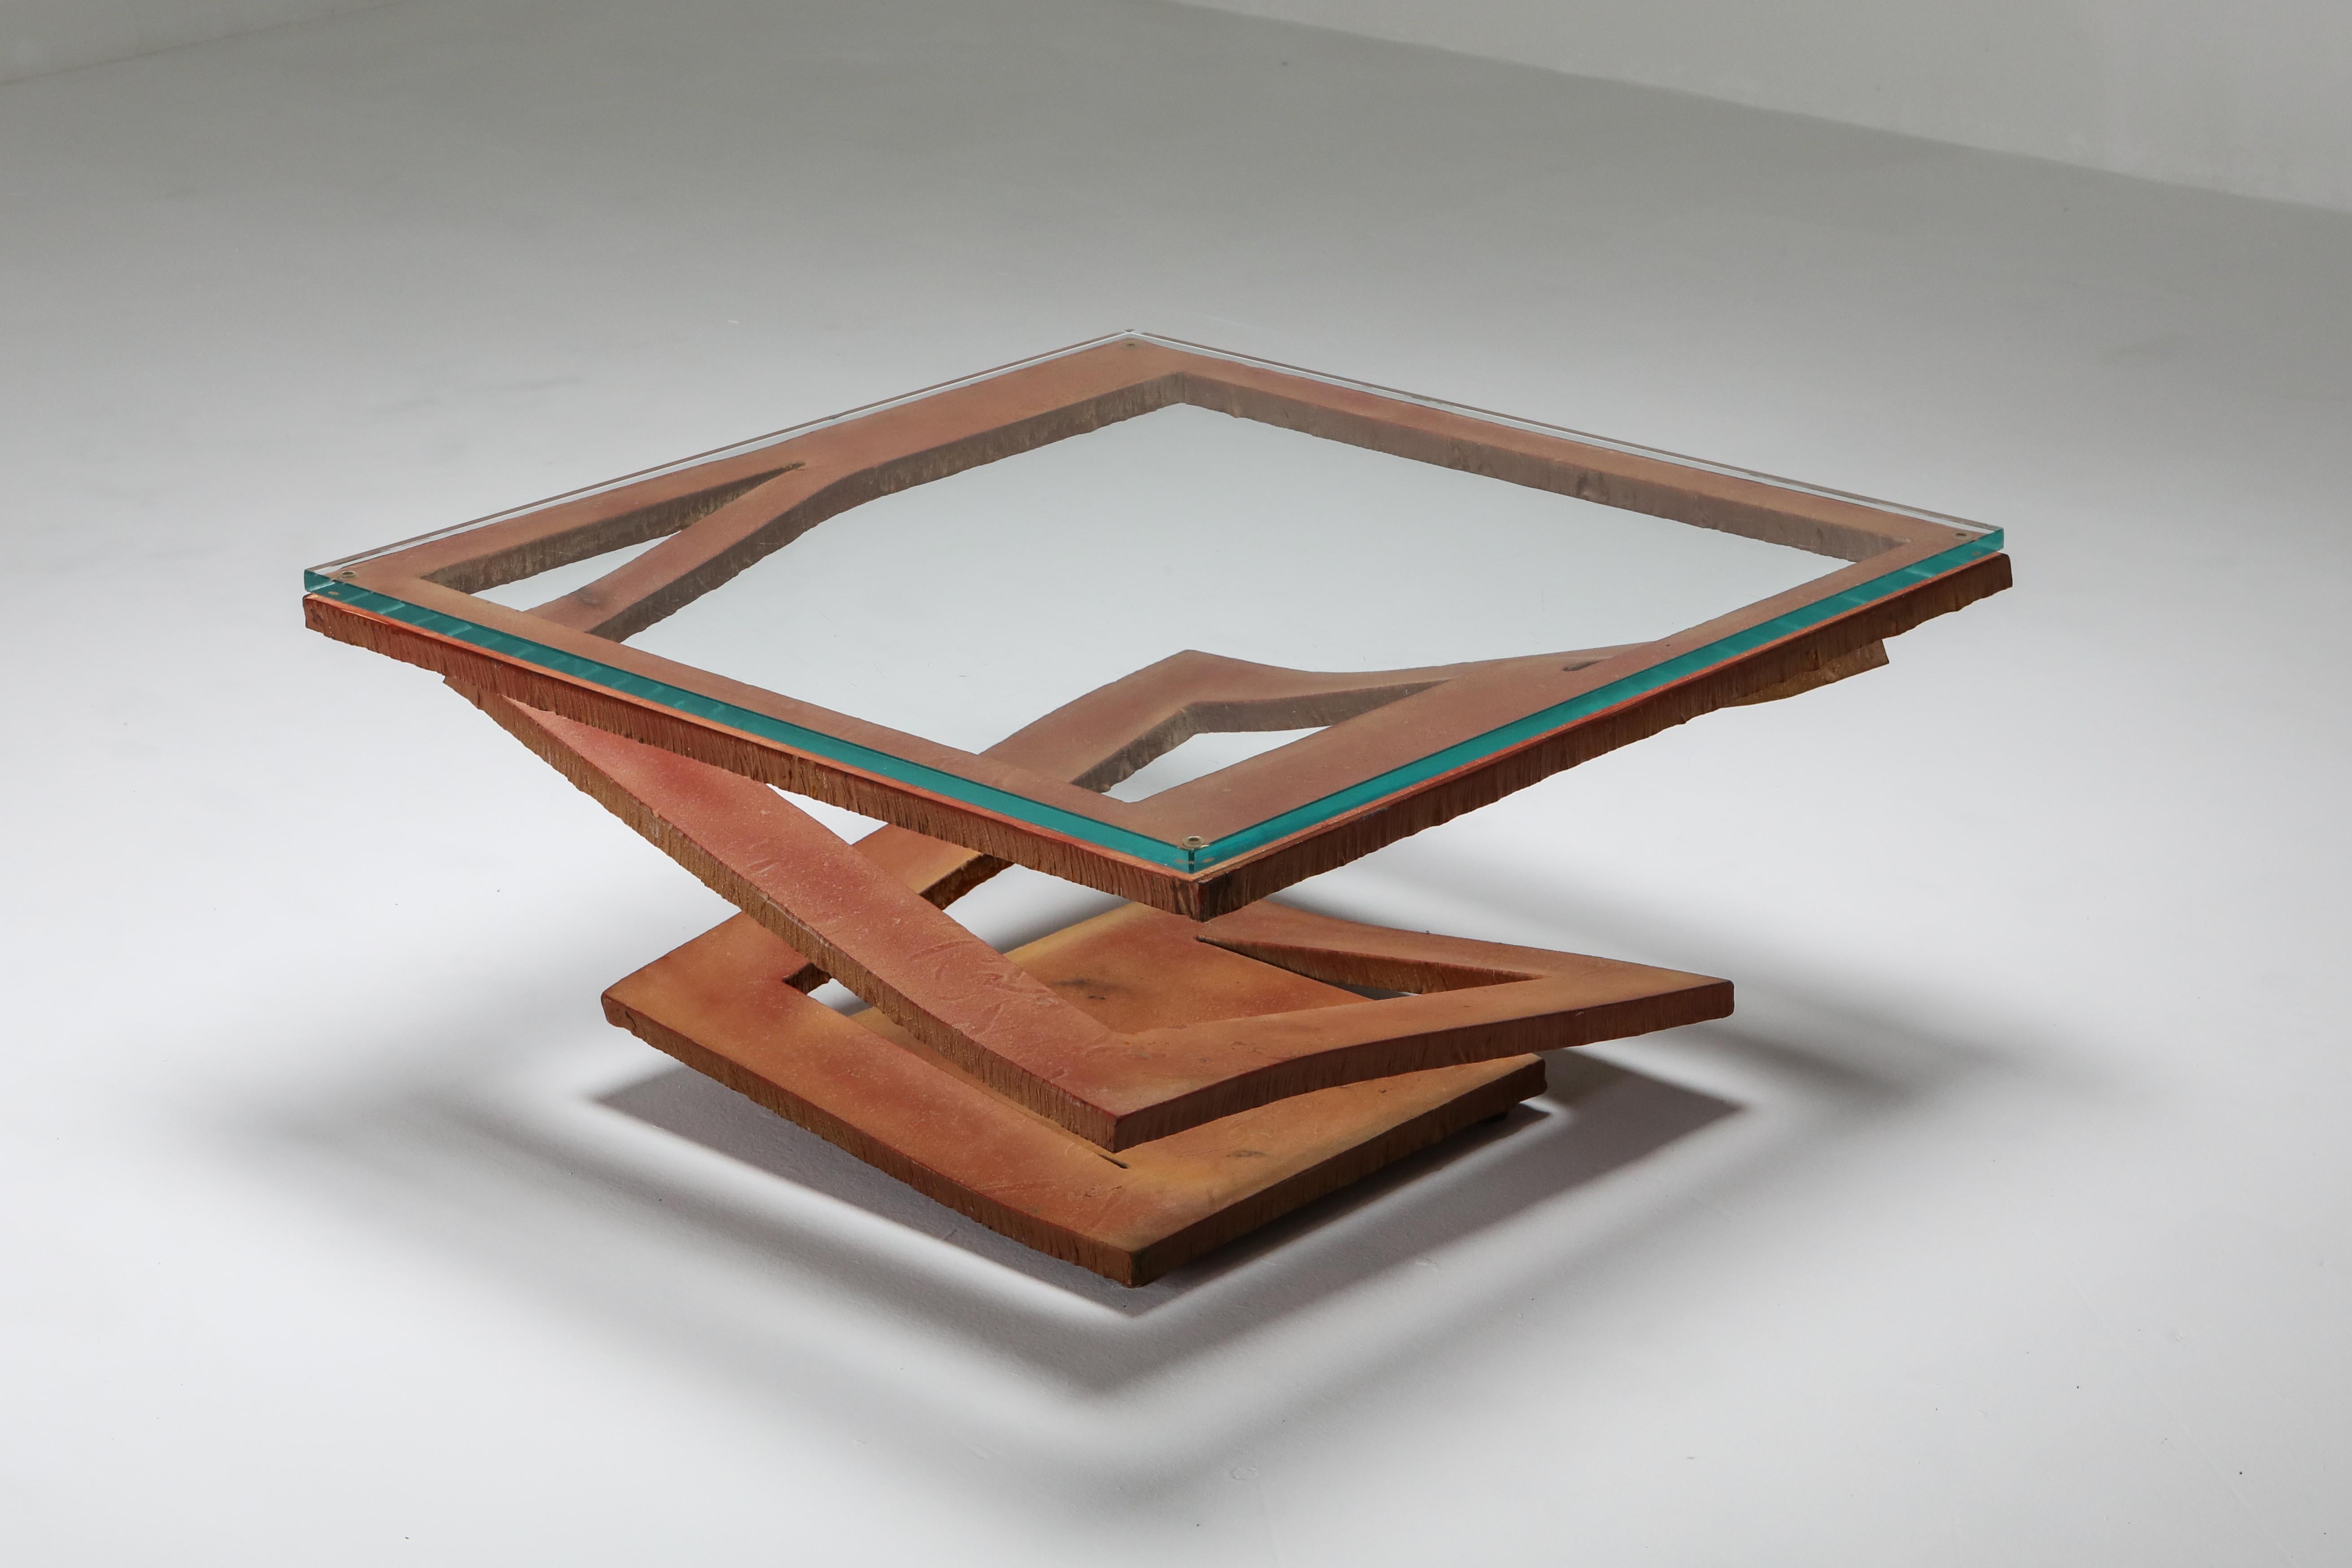 Roche Bobois, corten steel coffee table, Maurice Barilone, Italy, 1980s

Unusual coffee table, perceived from a steel square which through cut-outs spirals up to the top.
Creating an Escher like trompe-l'oeil effect.
Would fit well in a Kelly